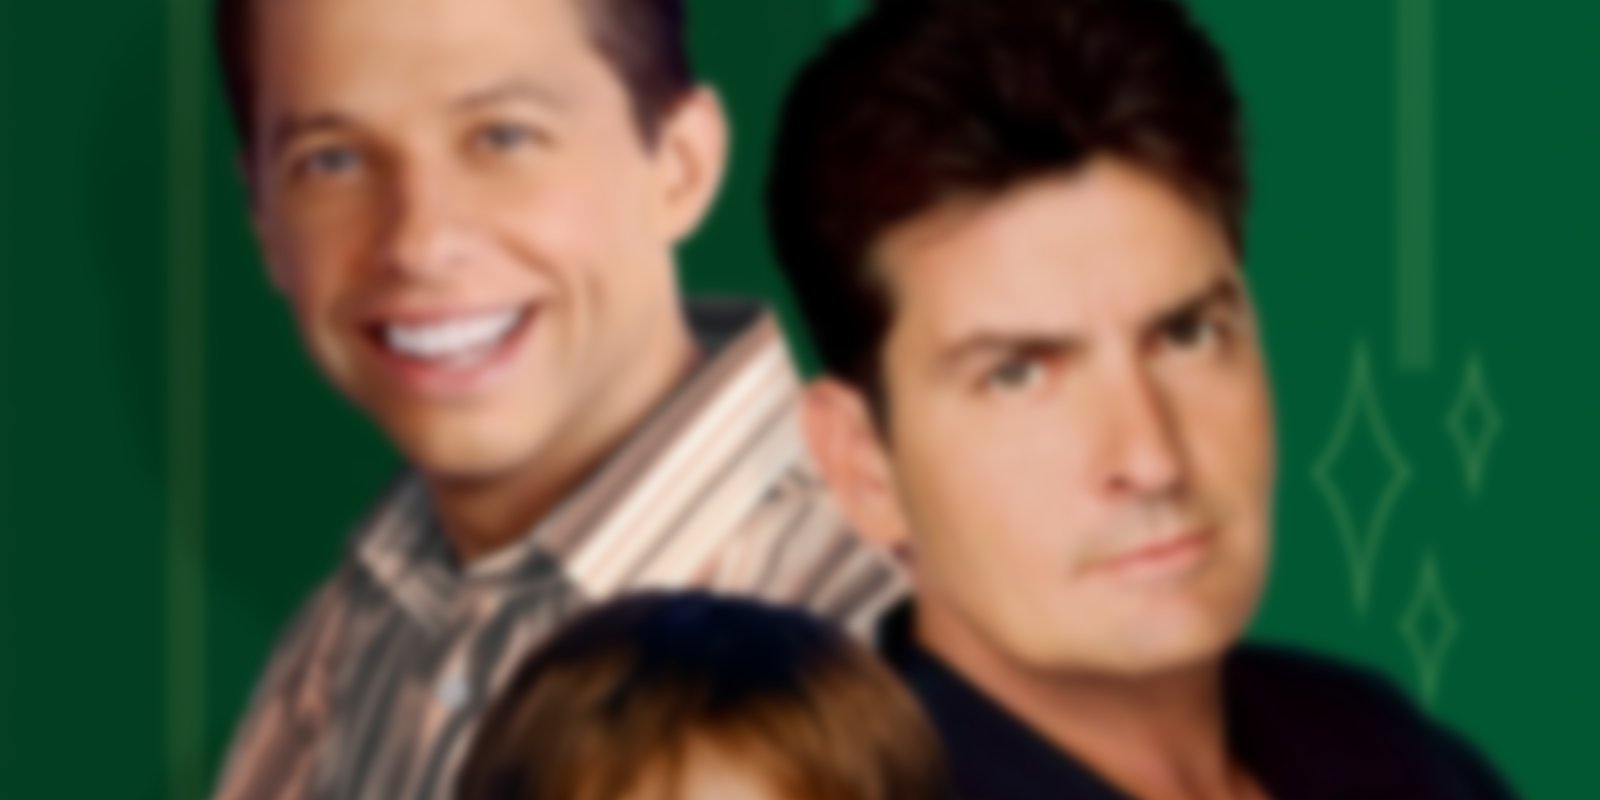 Two and a Half Men - Staffel 3